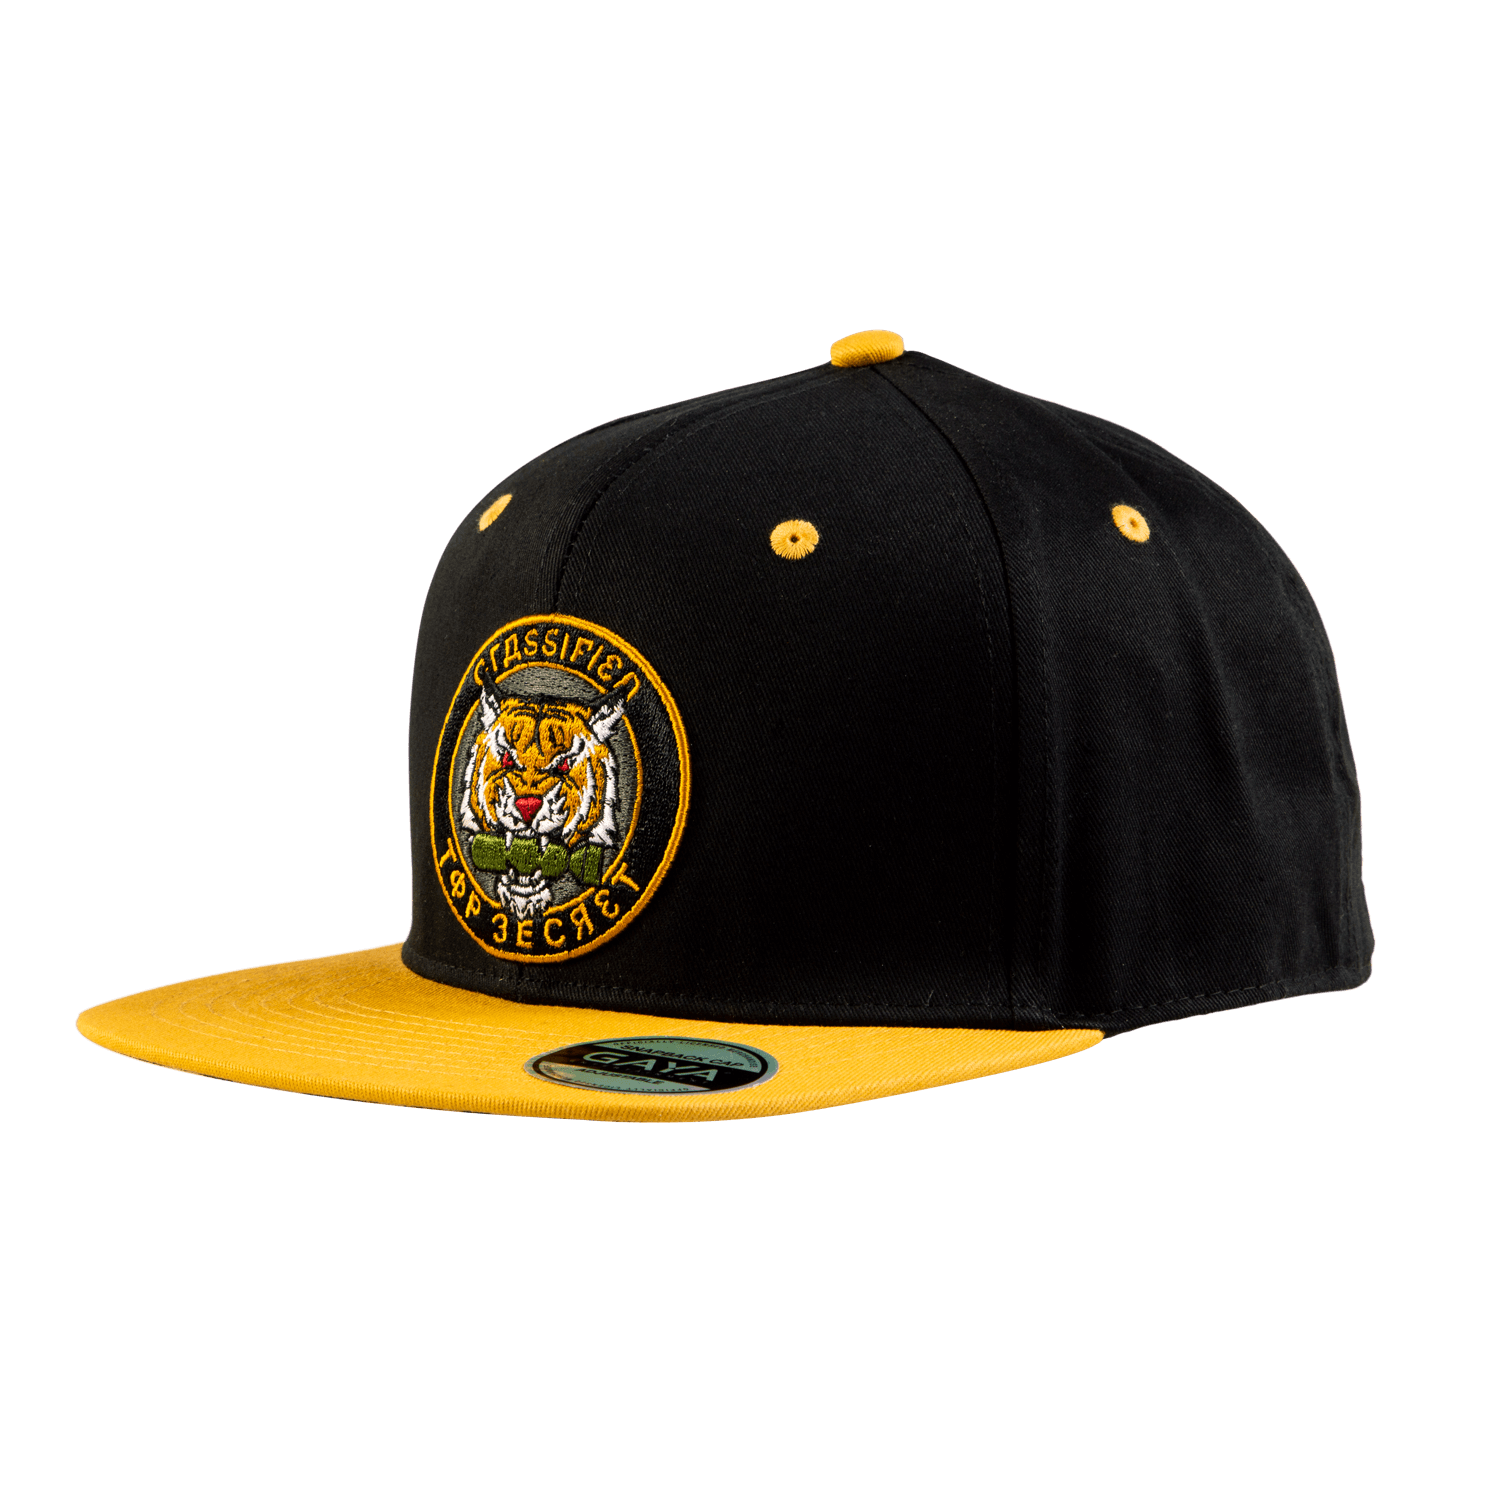 Call of Duty: Cold War Snapback "Top Secret Patch"